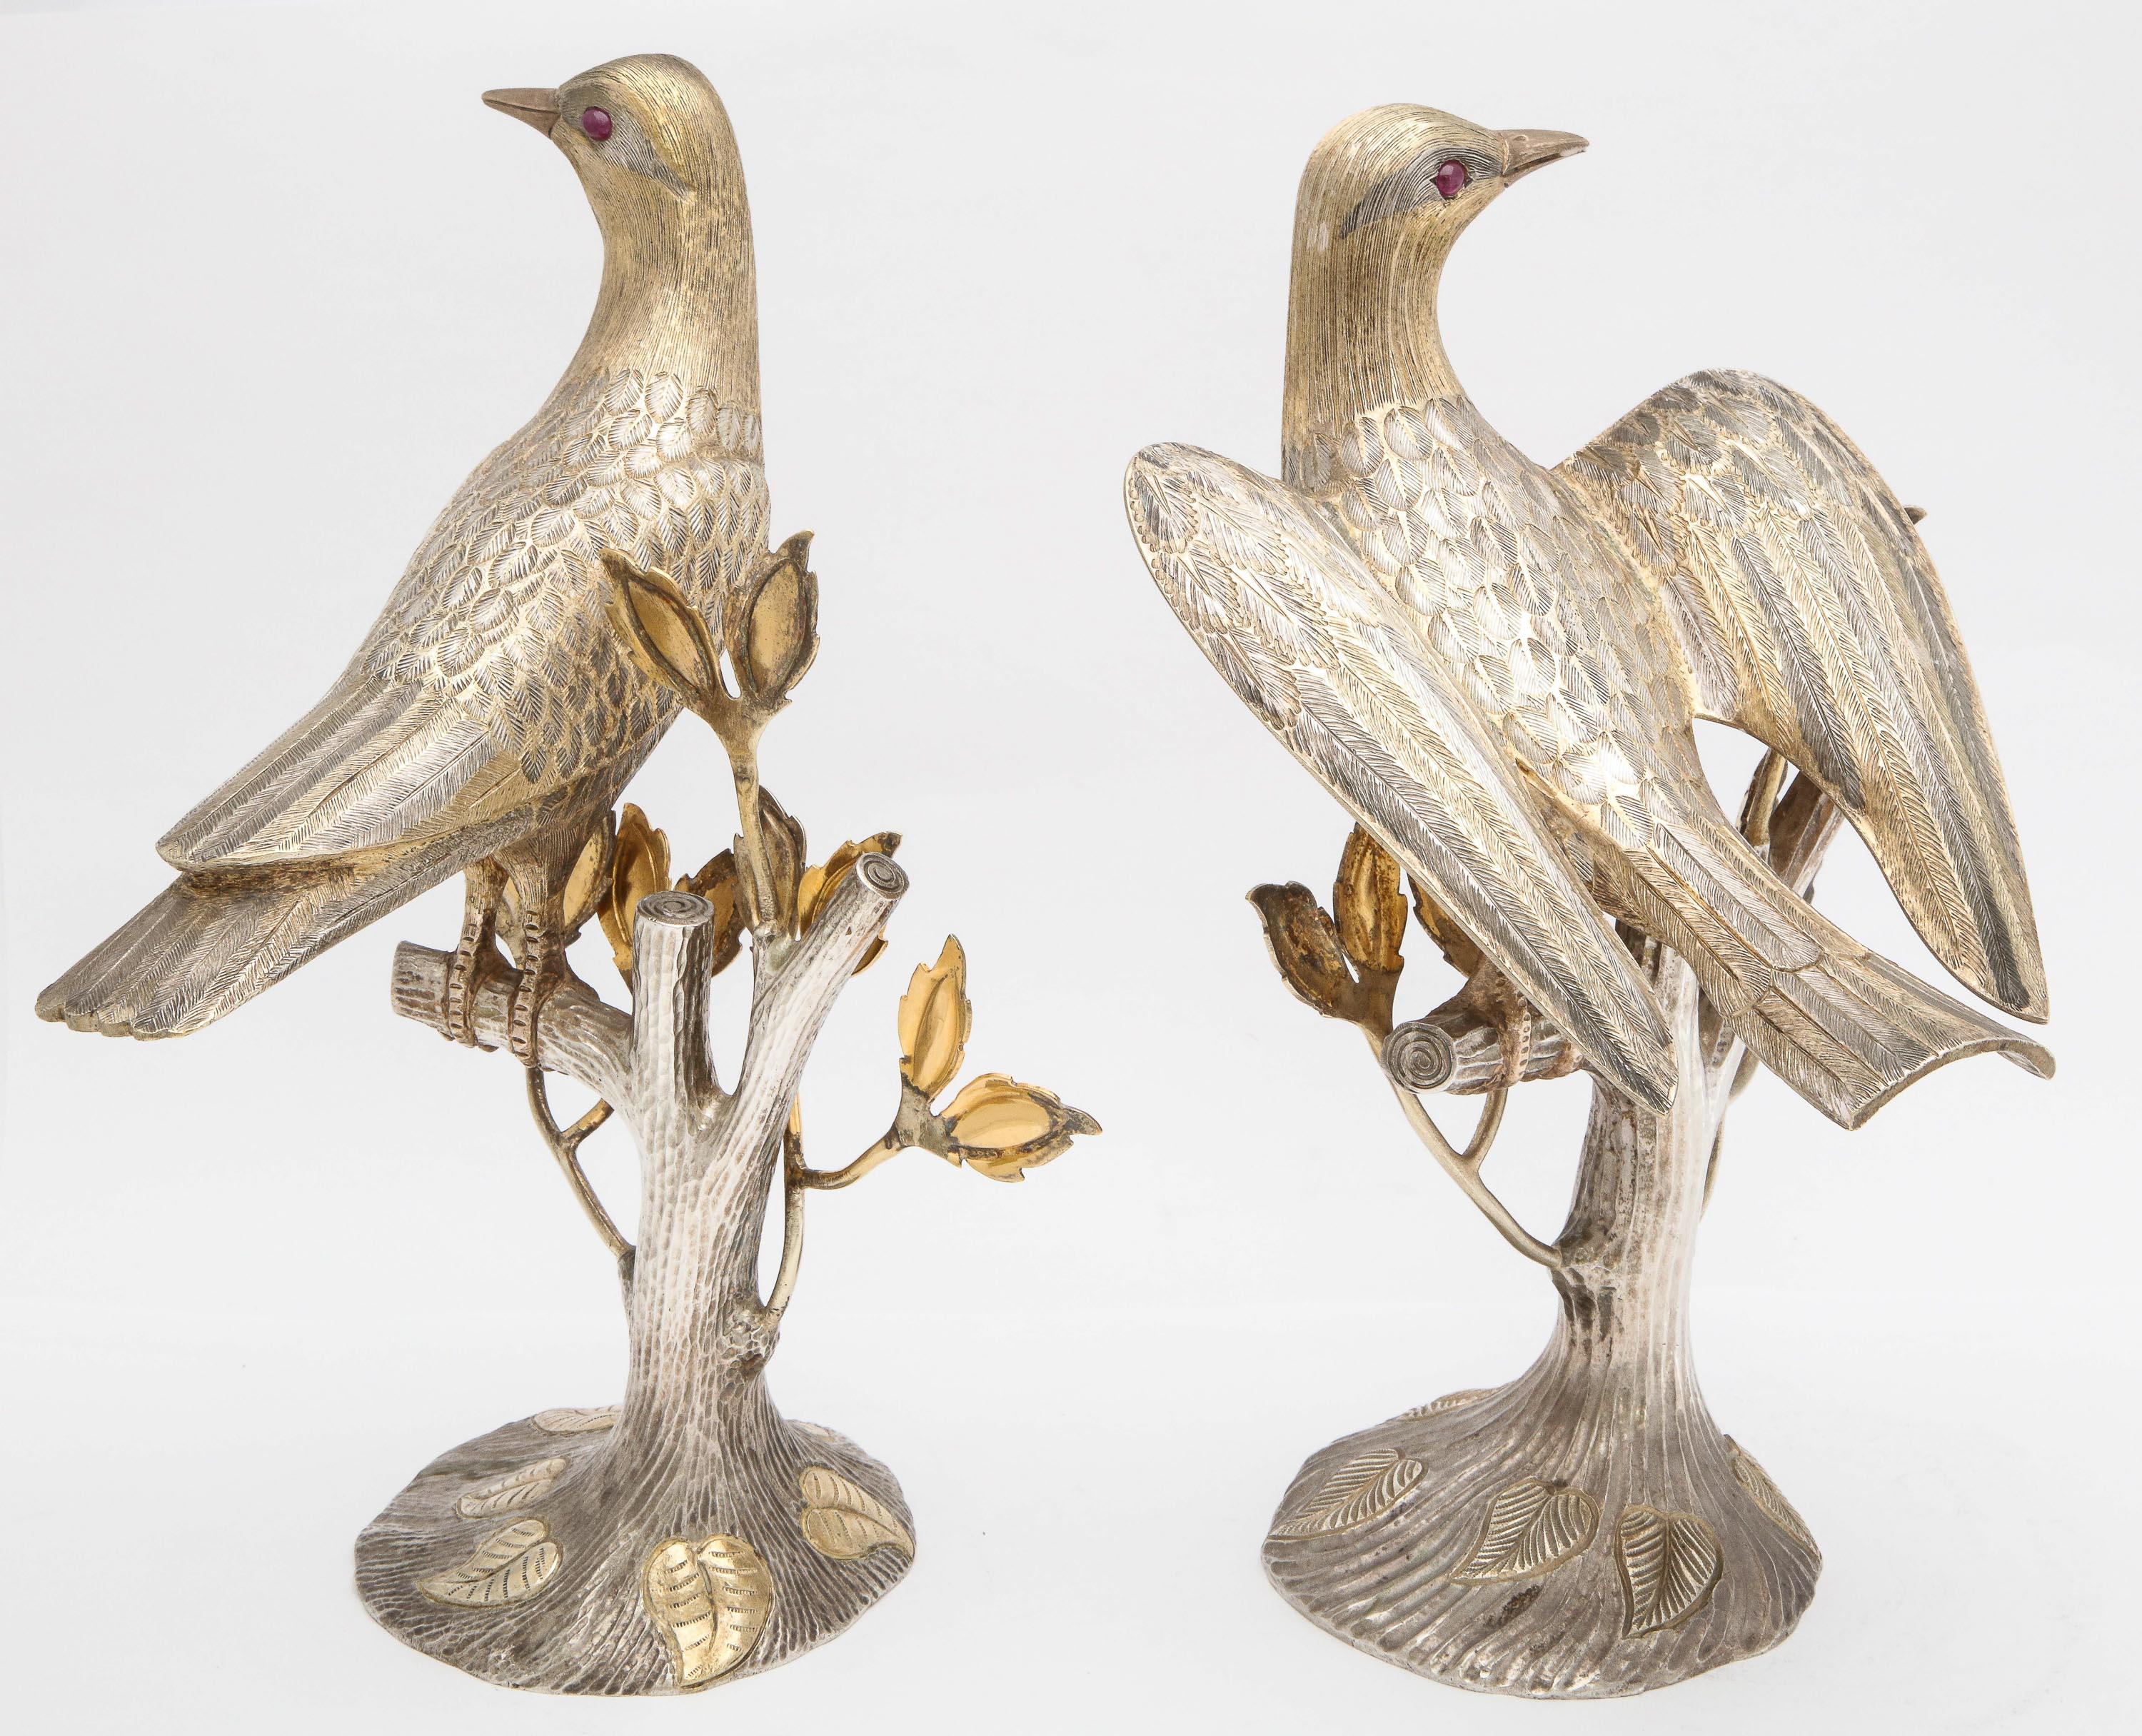 Mid-20th Century Midcentury Decorative Pair of Sterling Silver Table Birds by Tane